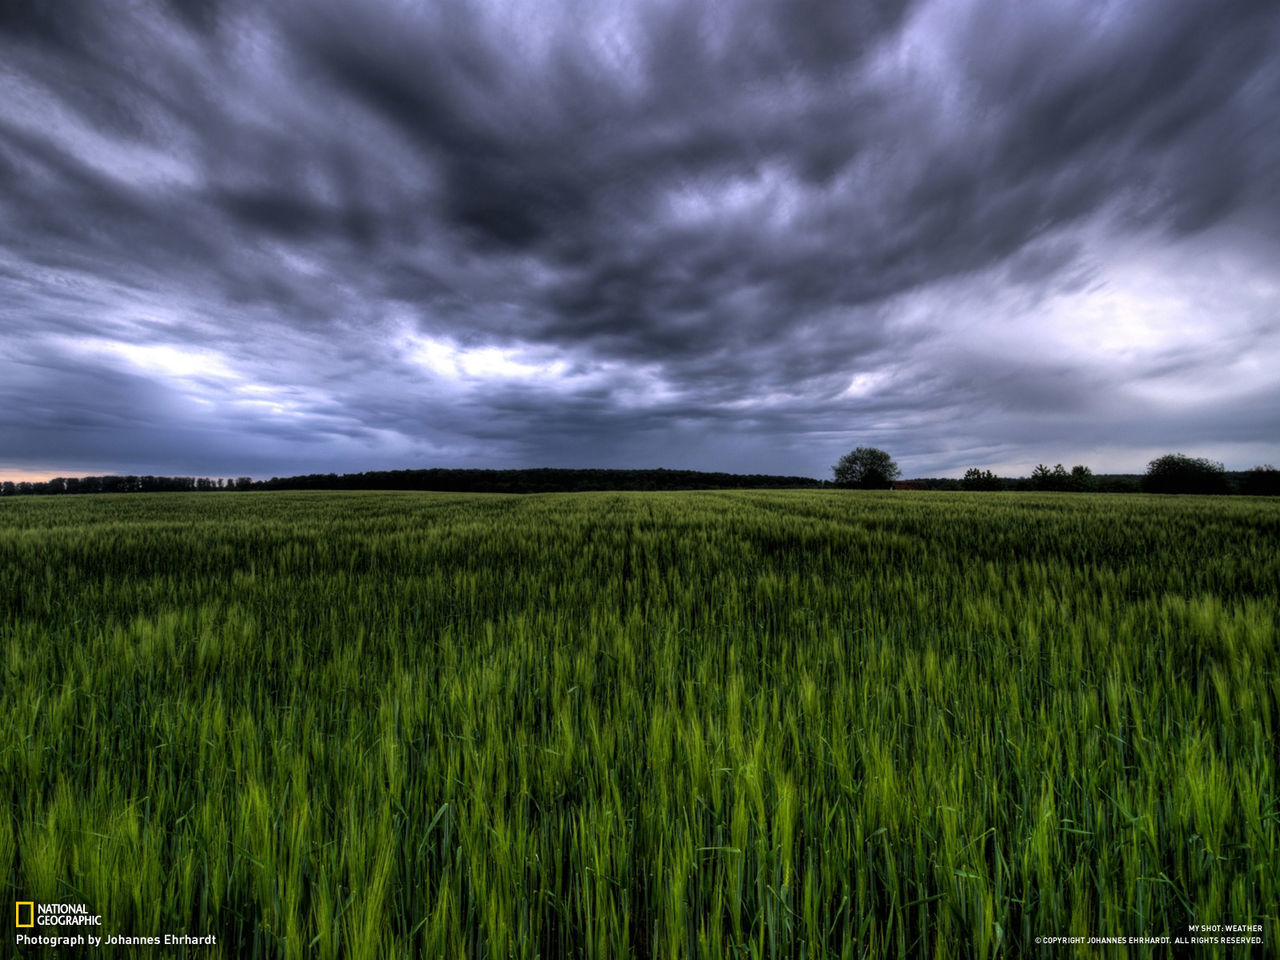 sky, cloud - sky, cloudy, tranquil scene, tranquility, field, scenics, beauty in nature, landscape, growth, nature, grass, weather, overcast, green color, cloud, tree, rural scene, storm cloud, agriculture